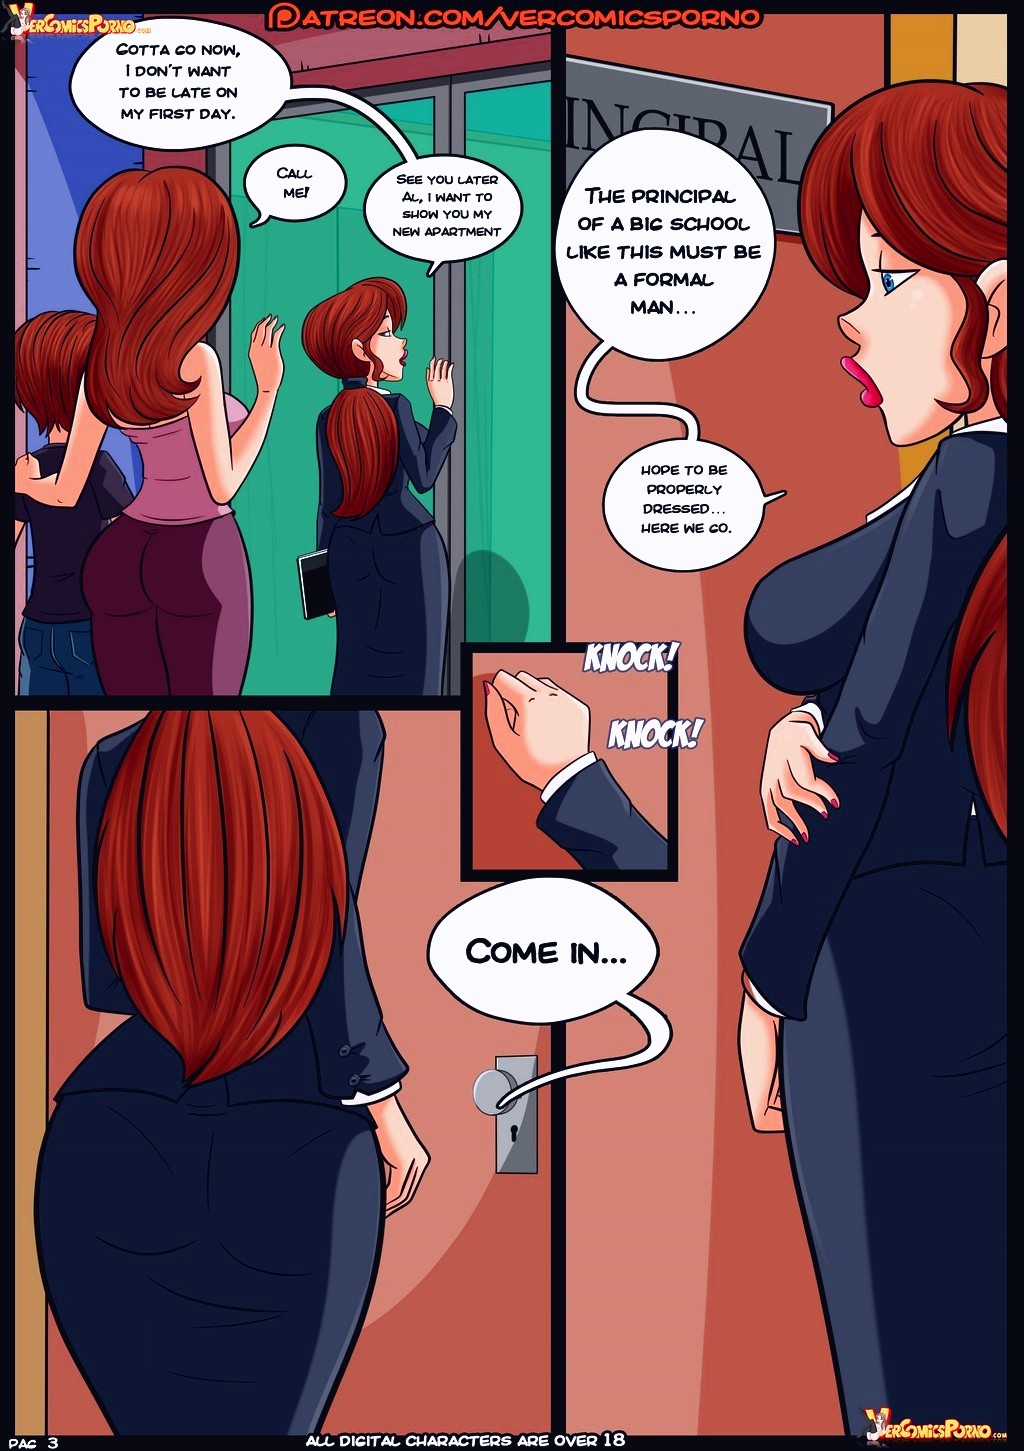 Valery Chronicles porn comic page 004